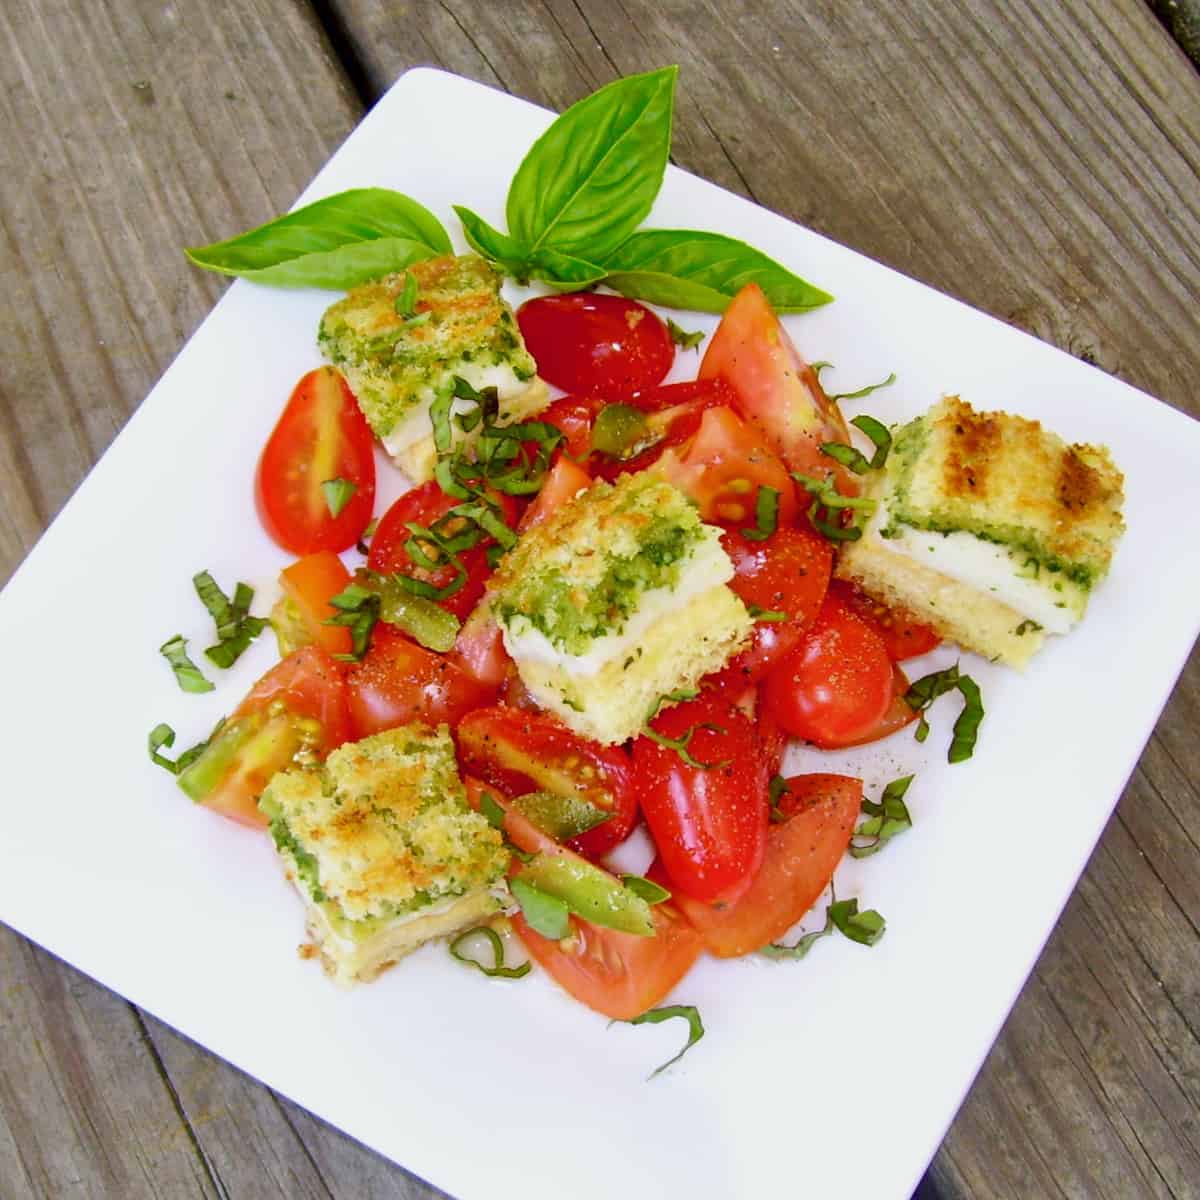 Heirloom Tomato Salad with Pesto Grilled Cheese Croutons.